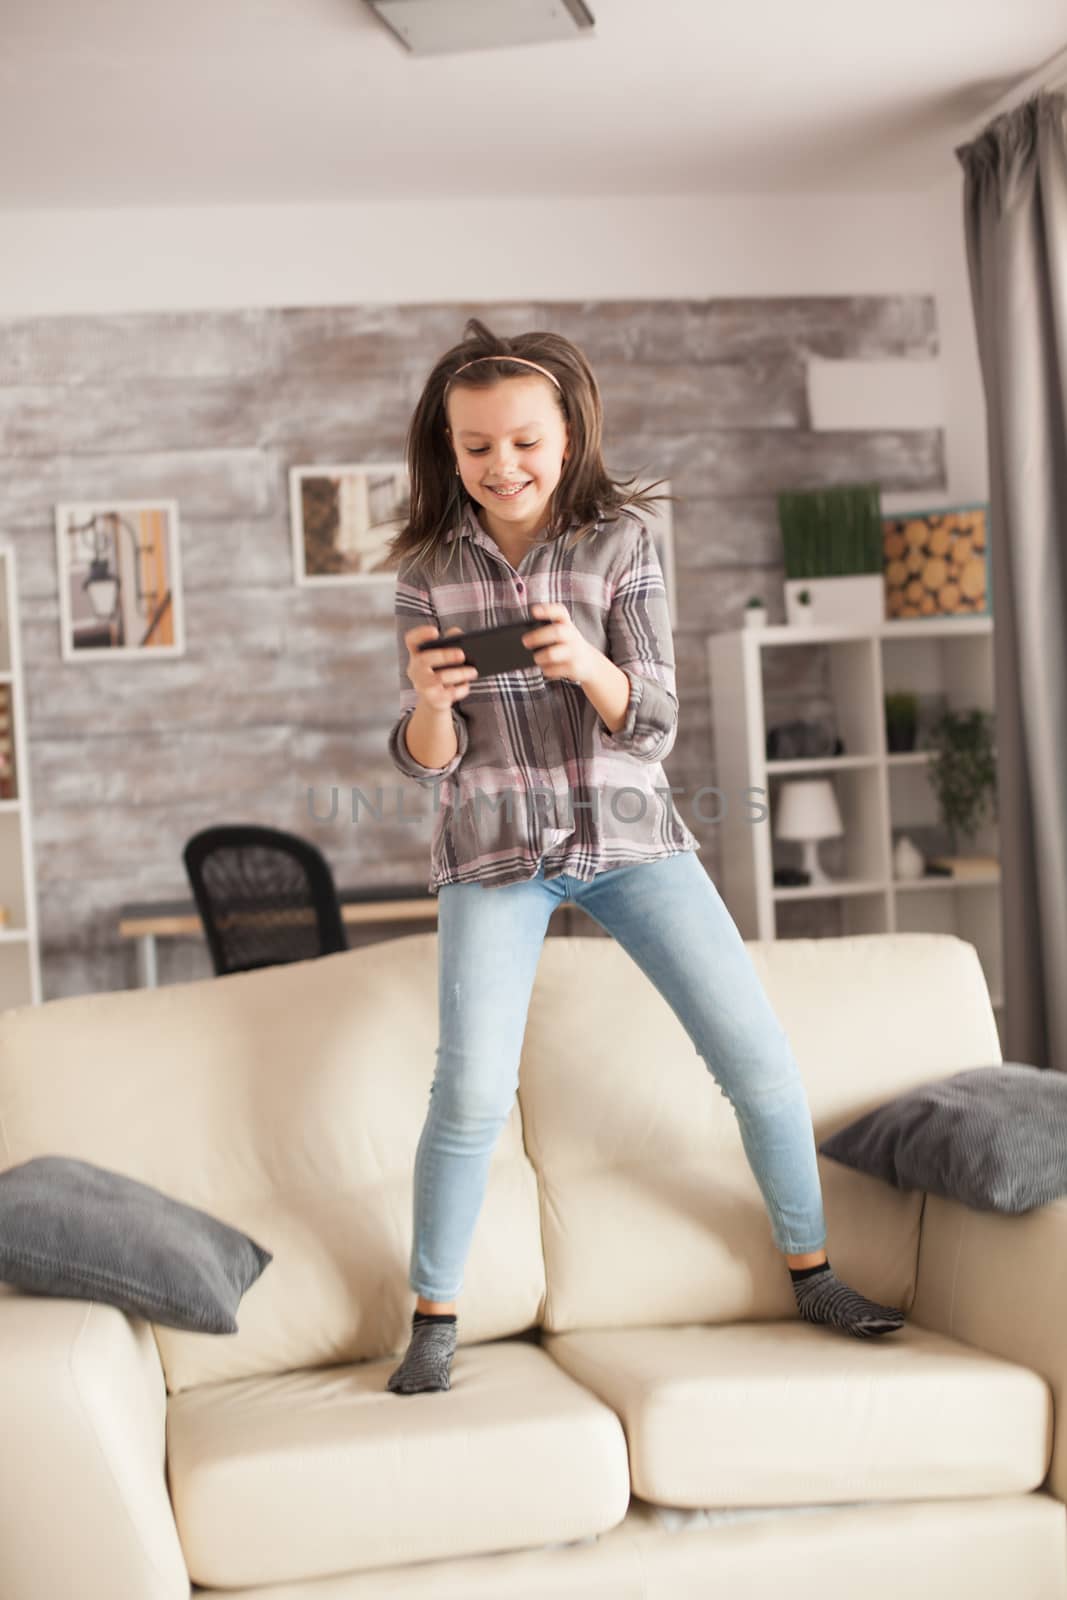 Excited little girl using her smartphone and jumping on the sofa.